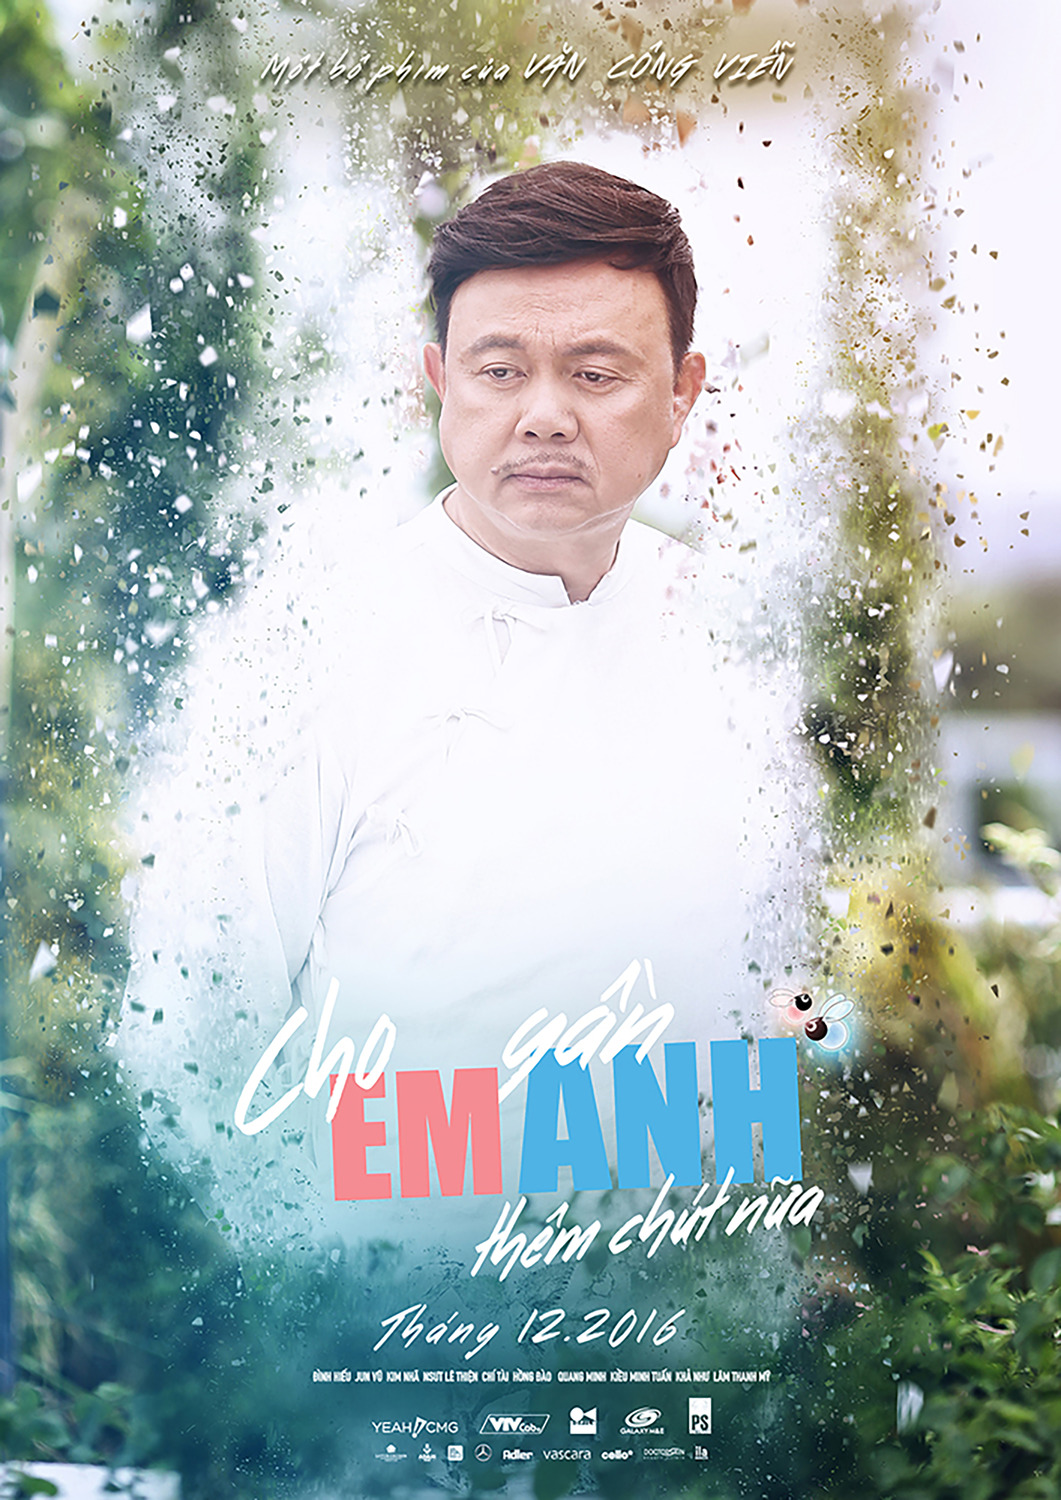 Extra Large Movie Poster Image for Cho em gần anh thêm chút nữa (#4 of 14)